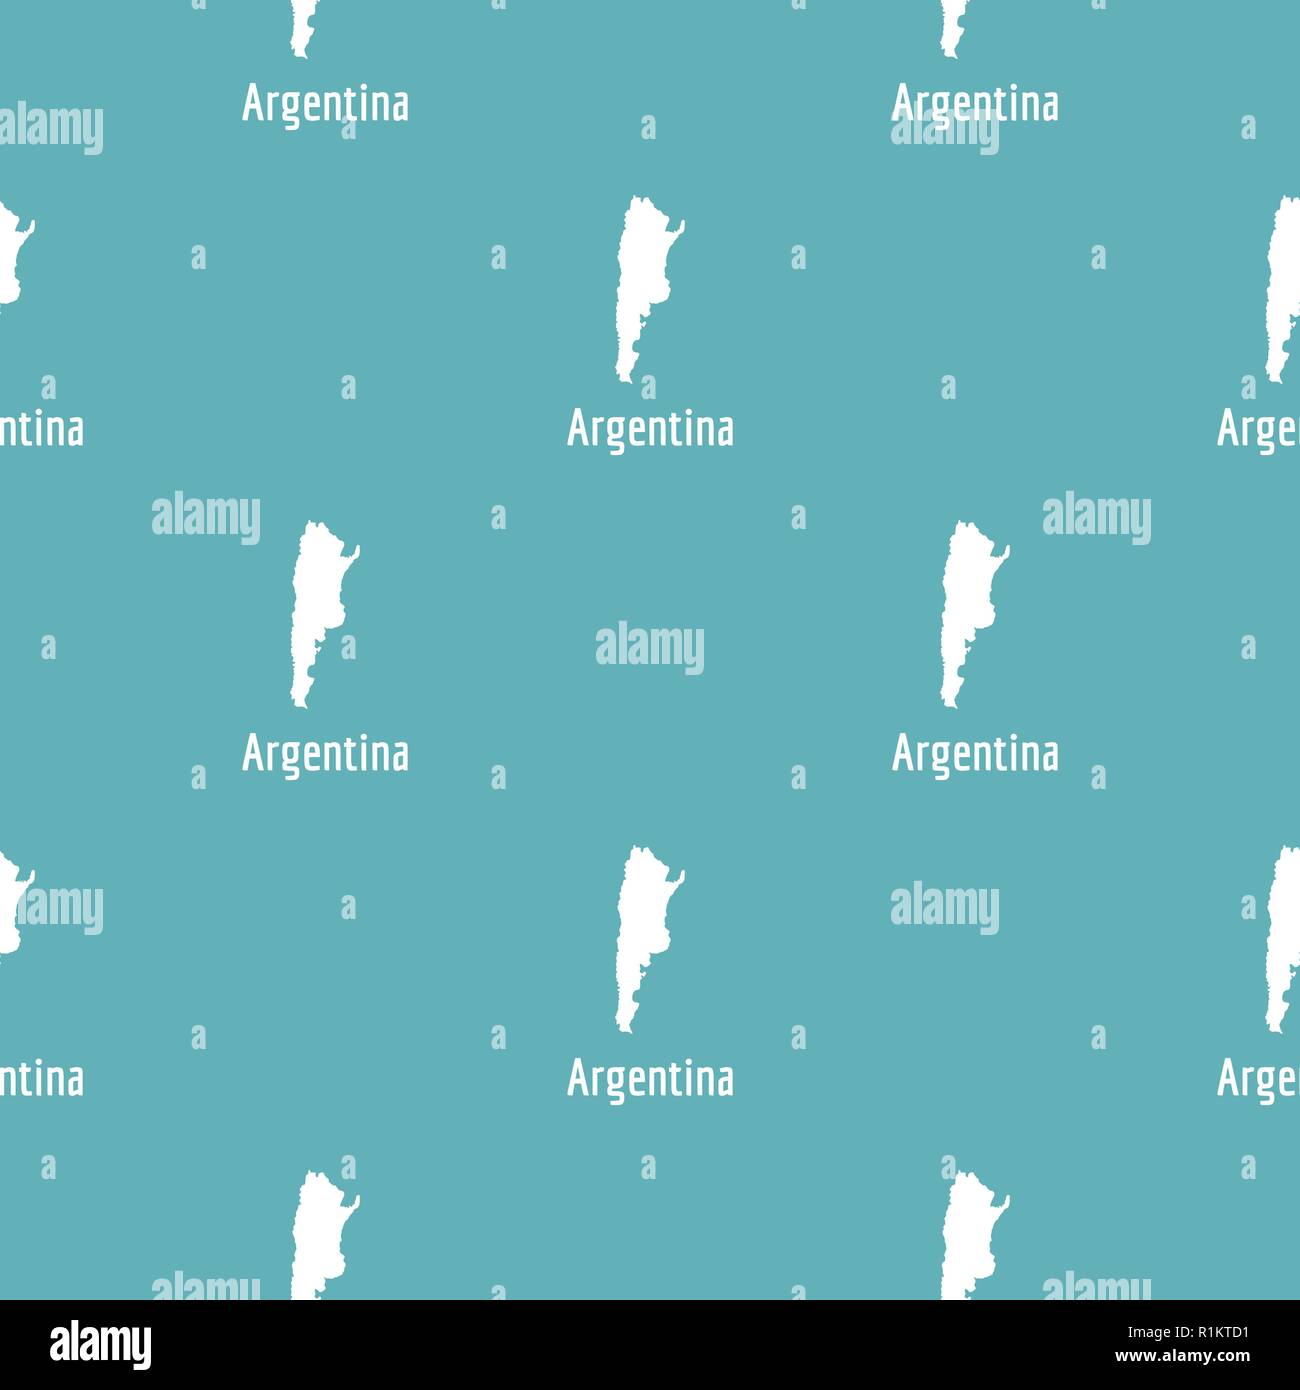 Argentina map in black. Simple illustration of Argentina map vector isolated on white background Stock Vector